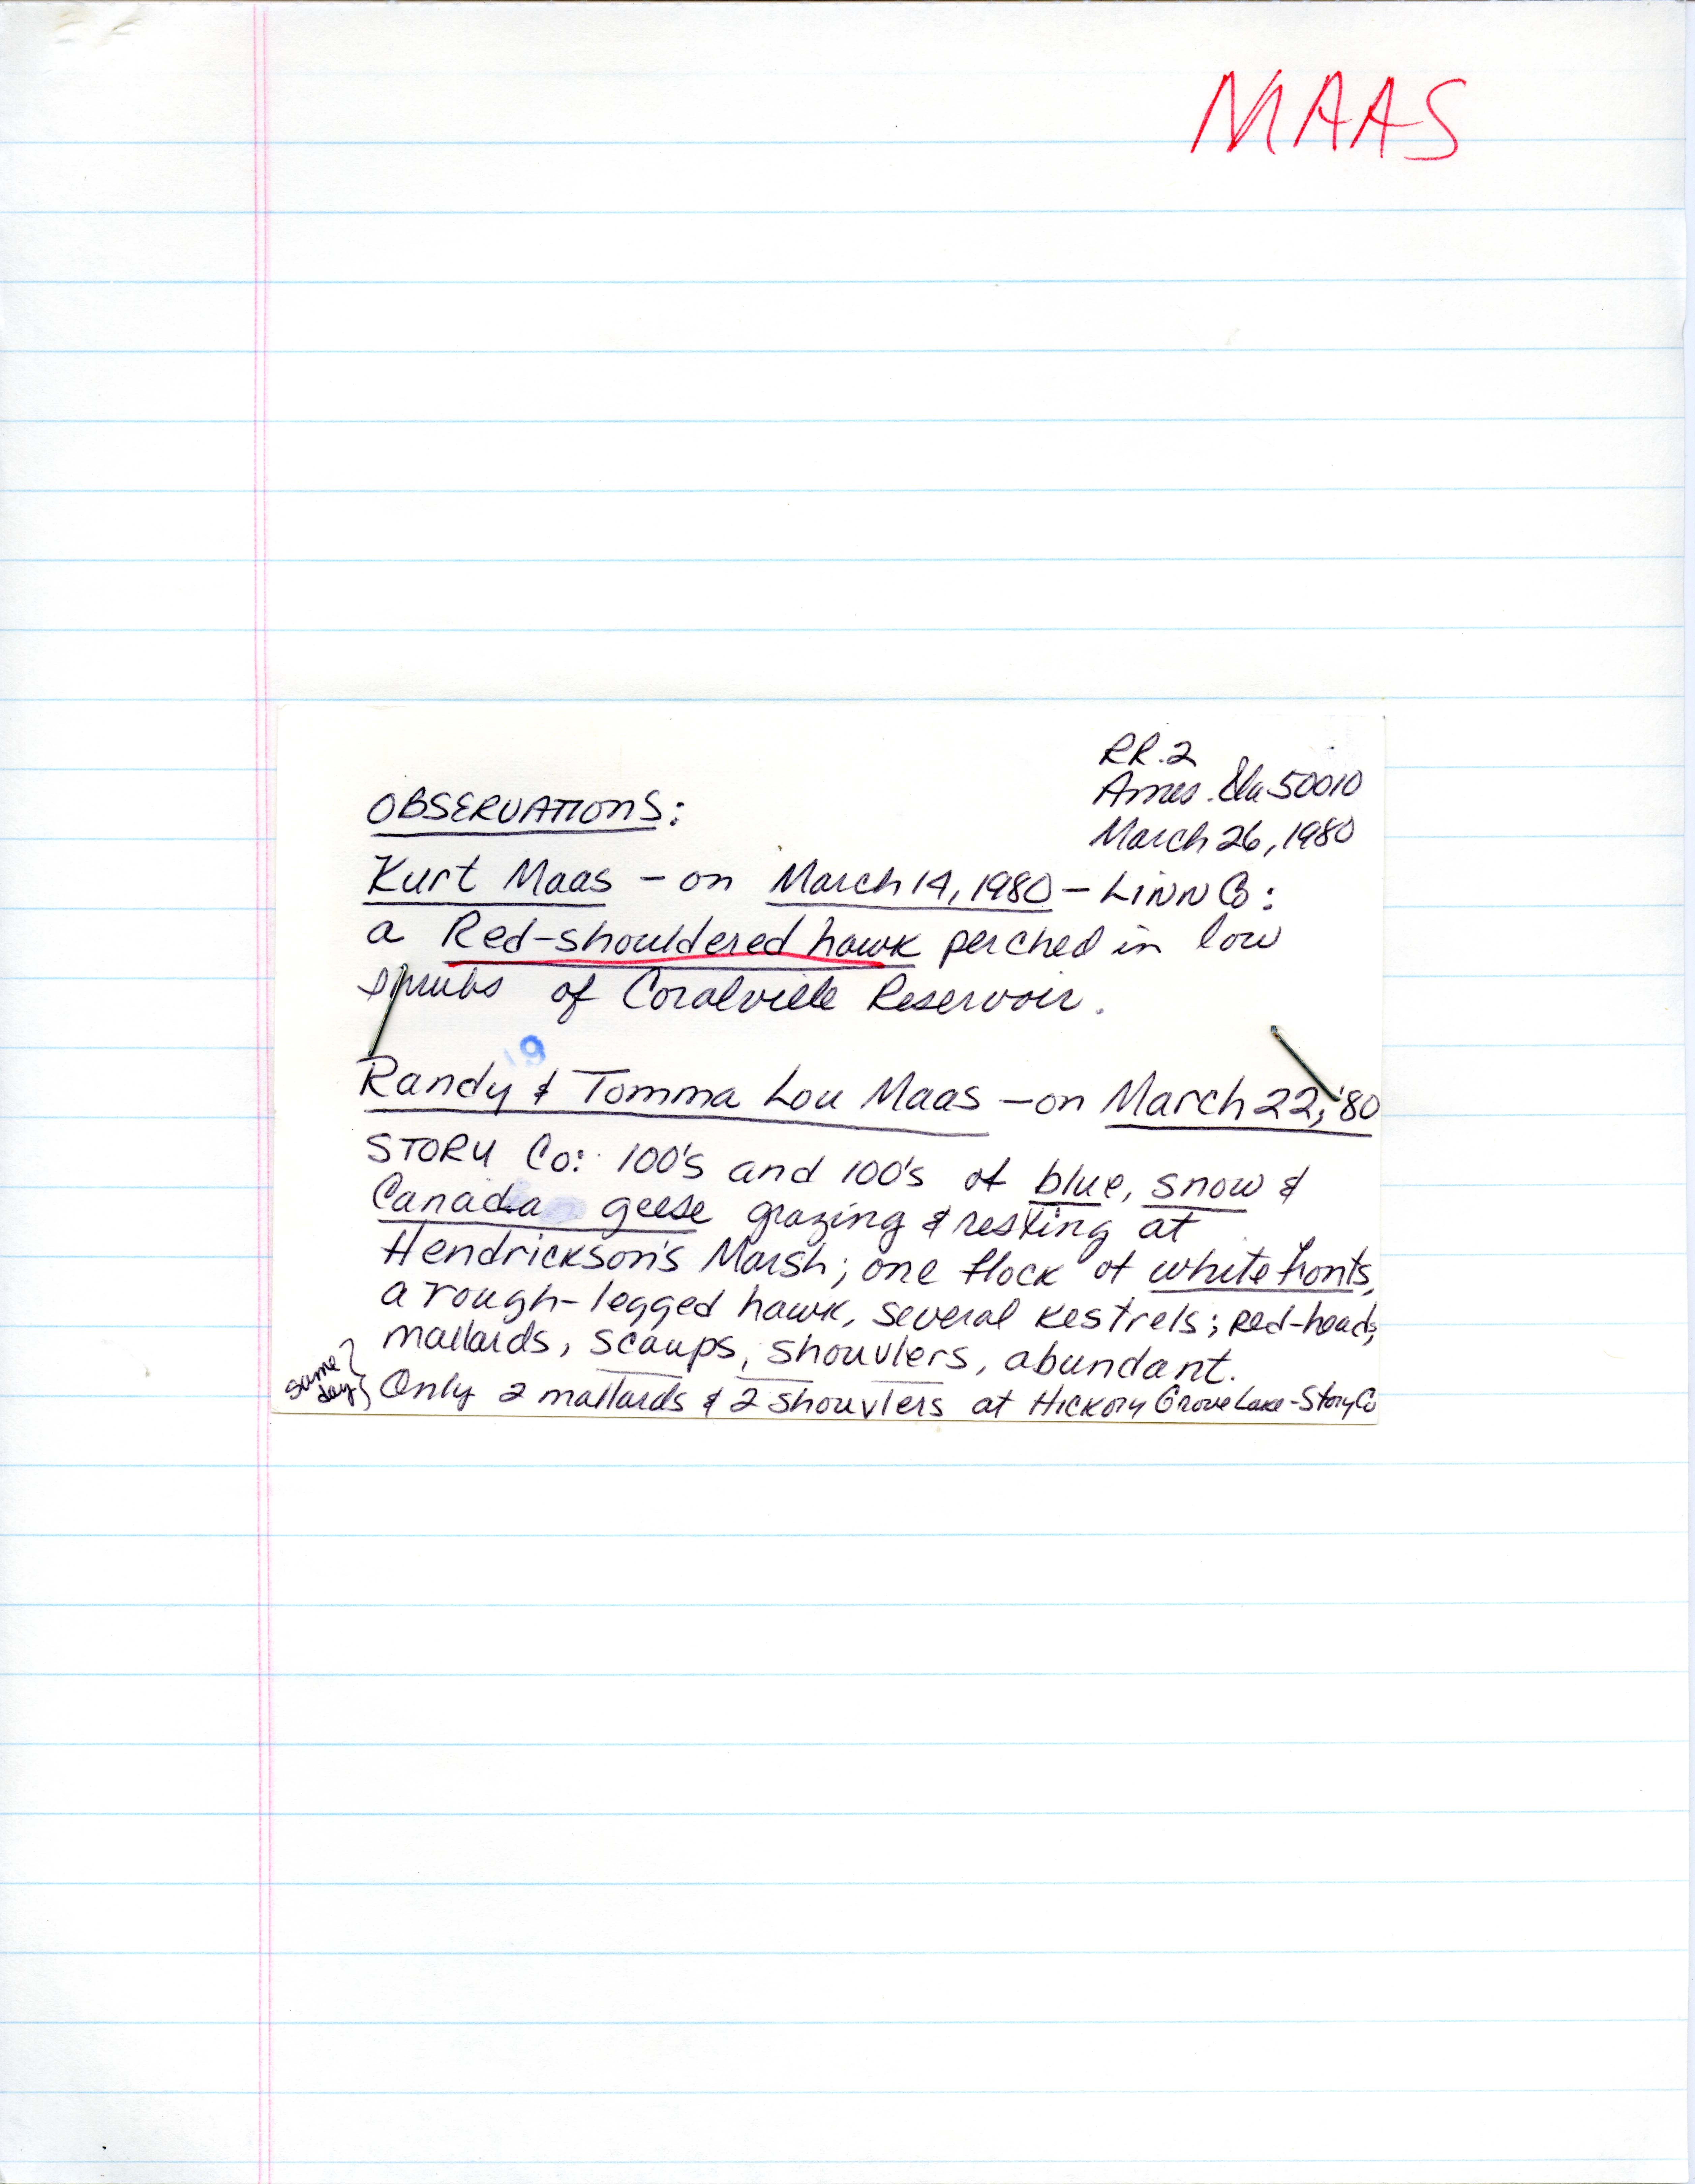 Field notes contributed by Randy Maas, Tomma Lou Mass and Kurt Maas, March 26, 1980